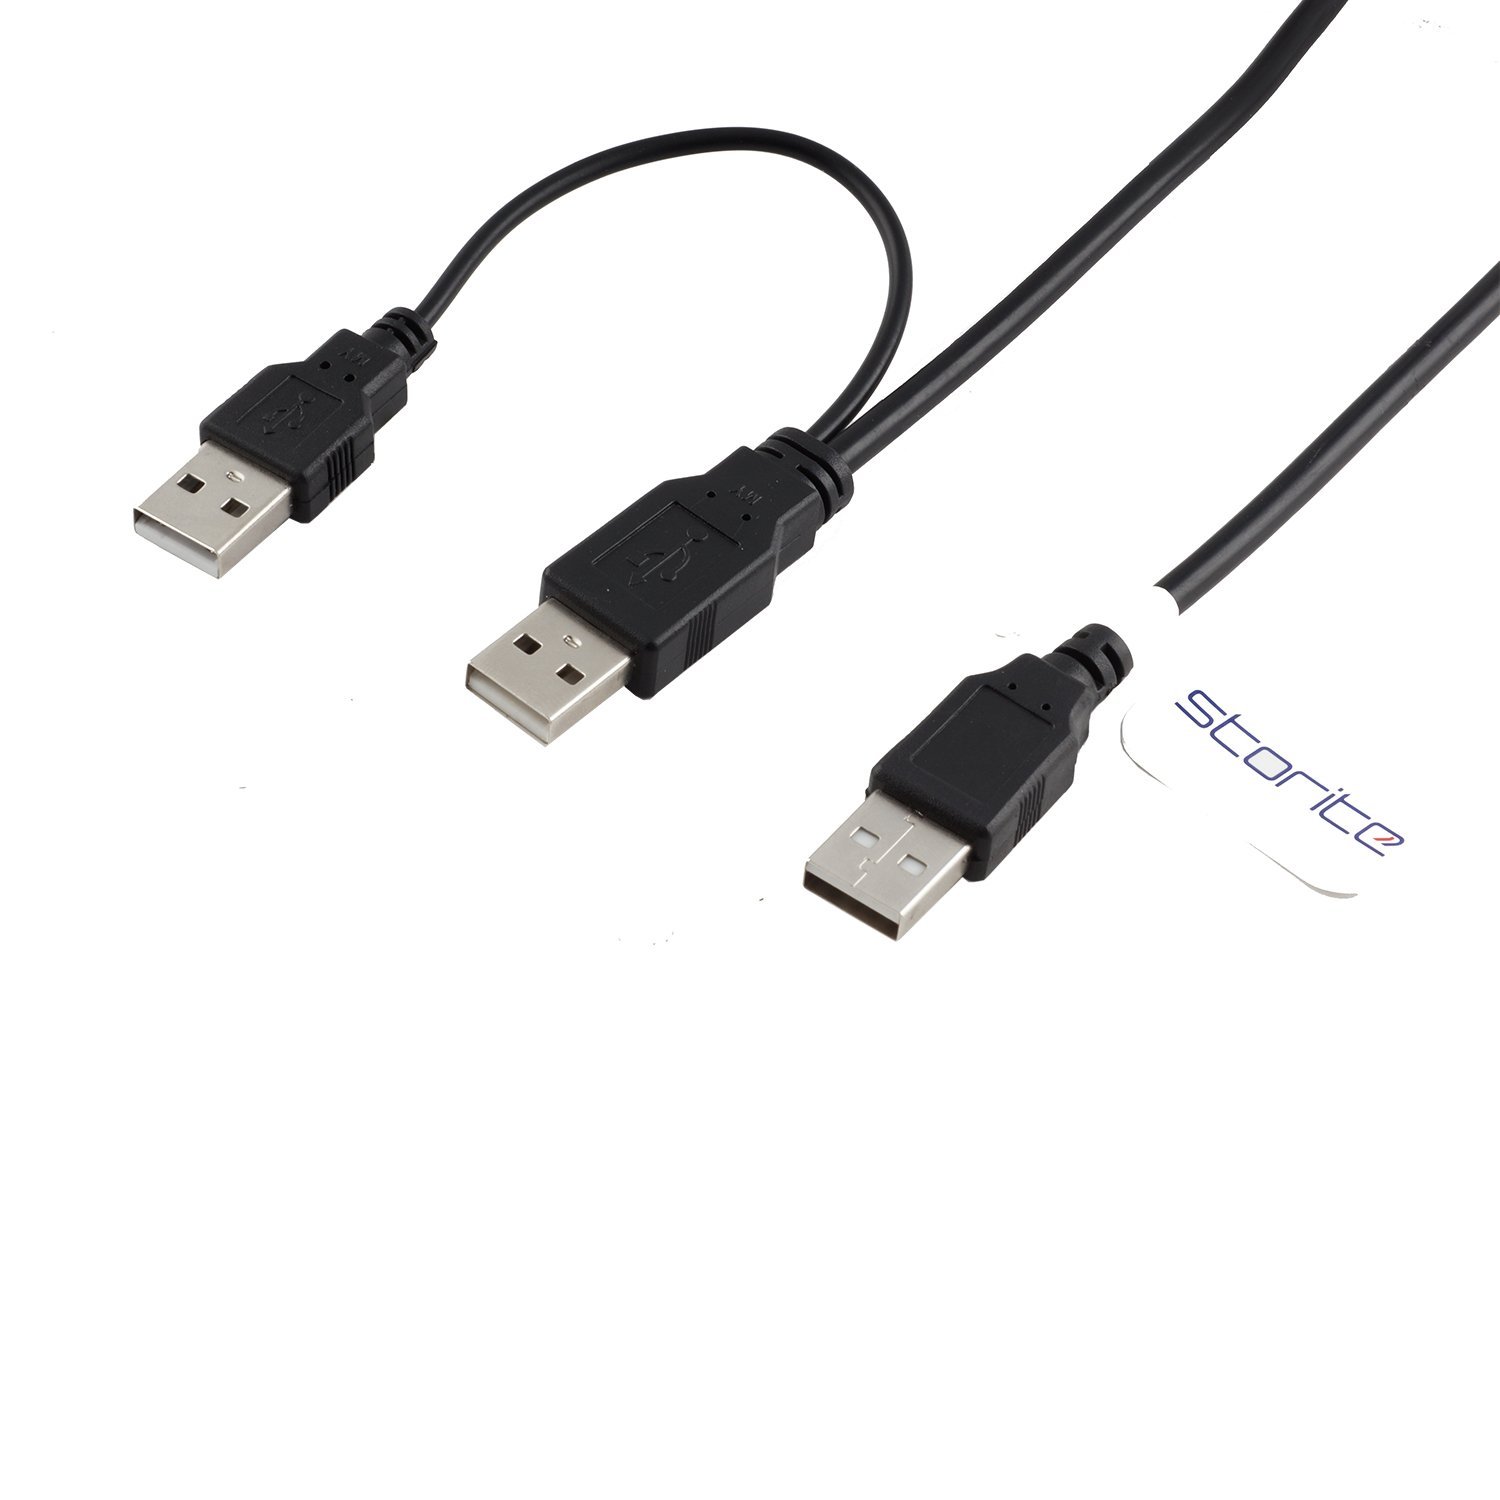 Power and data exchange Cable